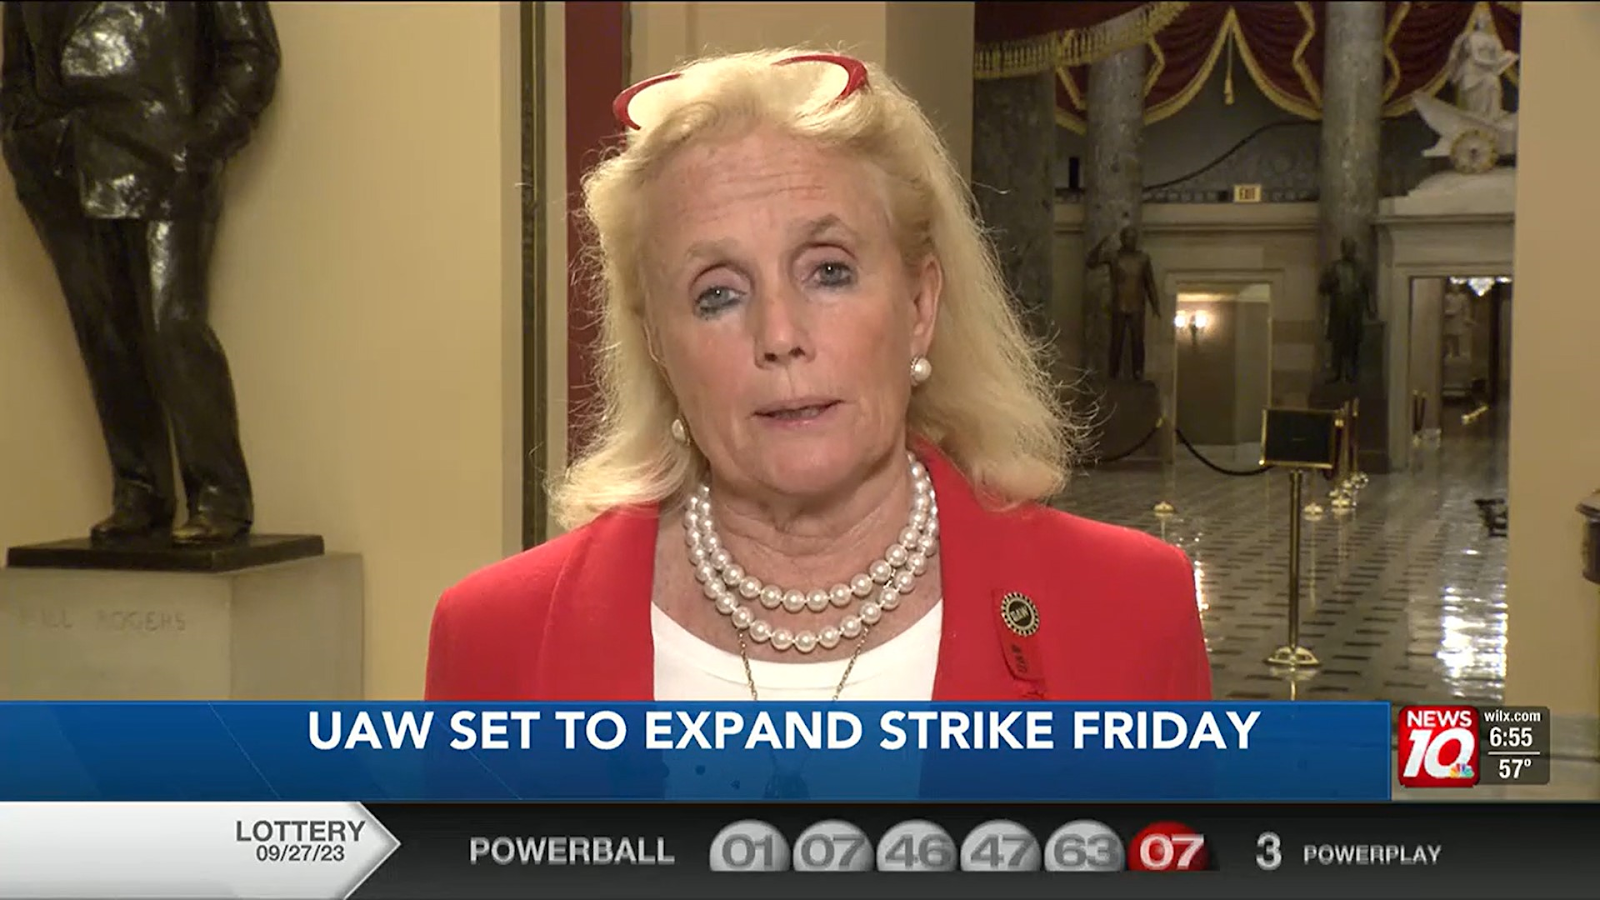 Representative Dingell on News 10 talking about the expanding UAW strike